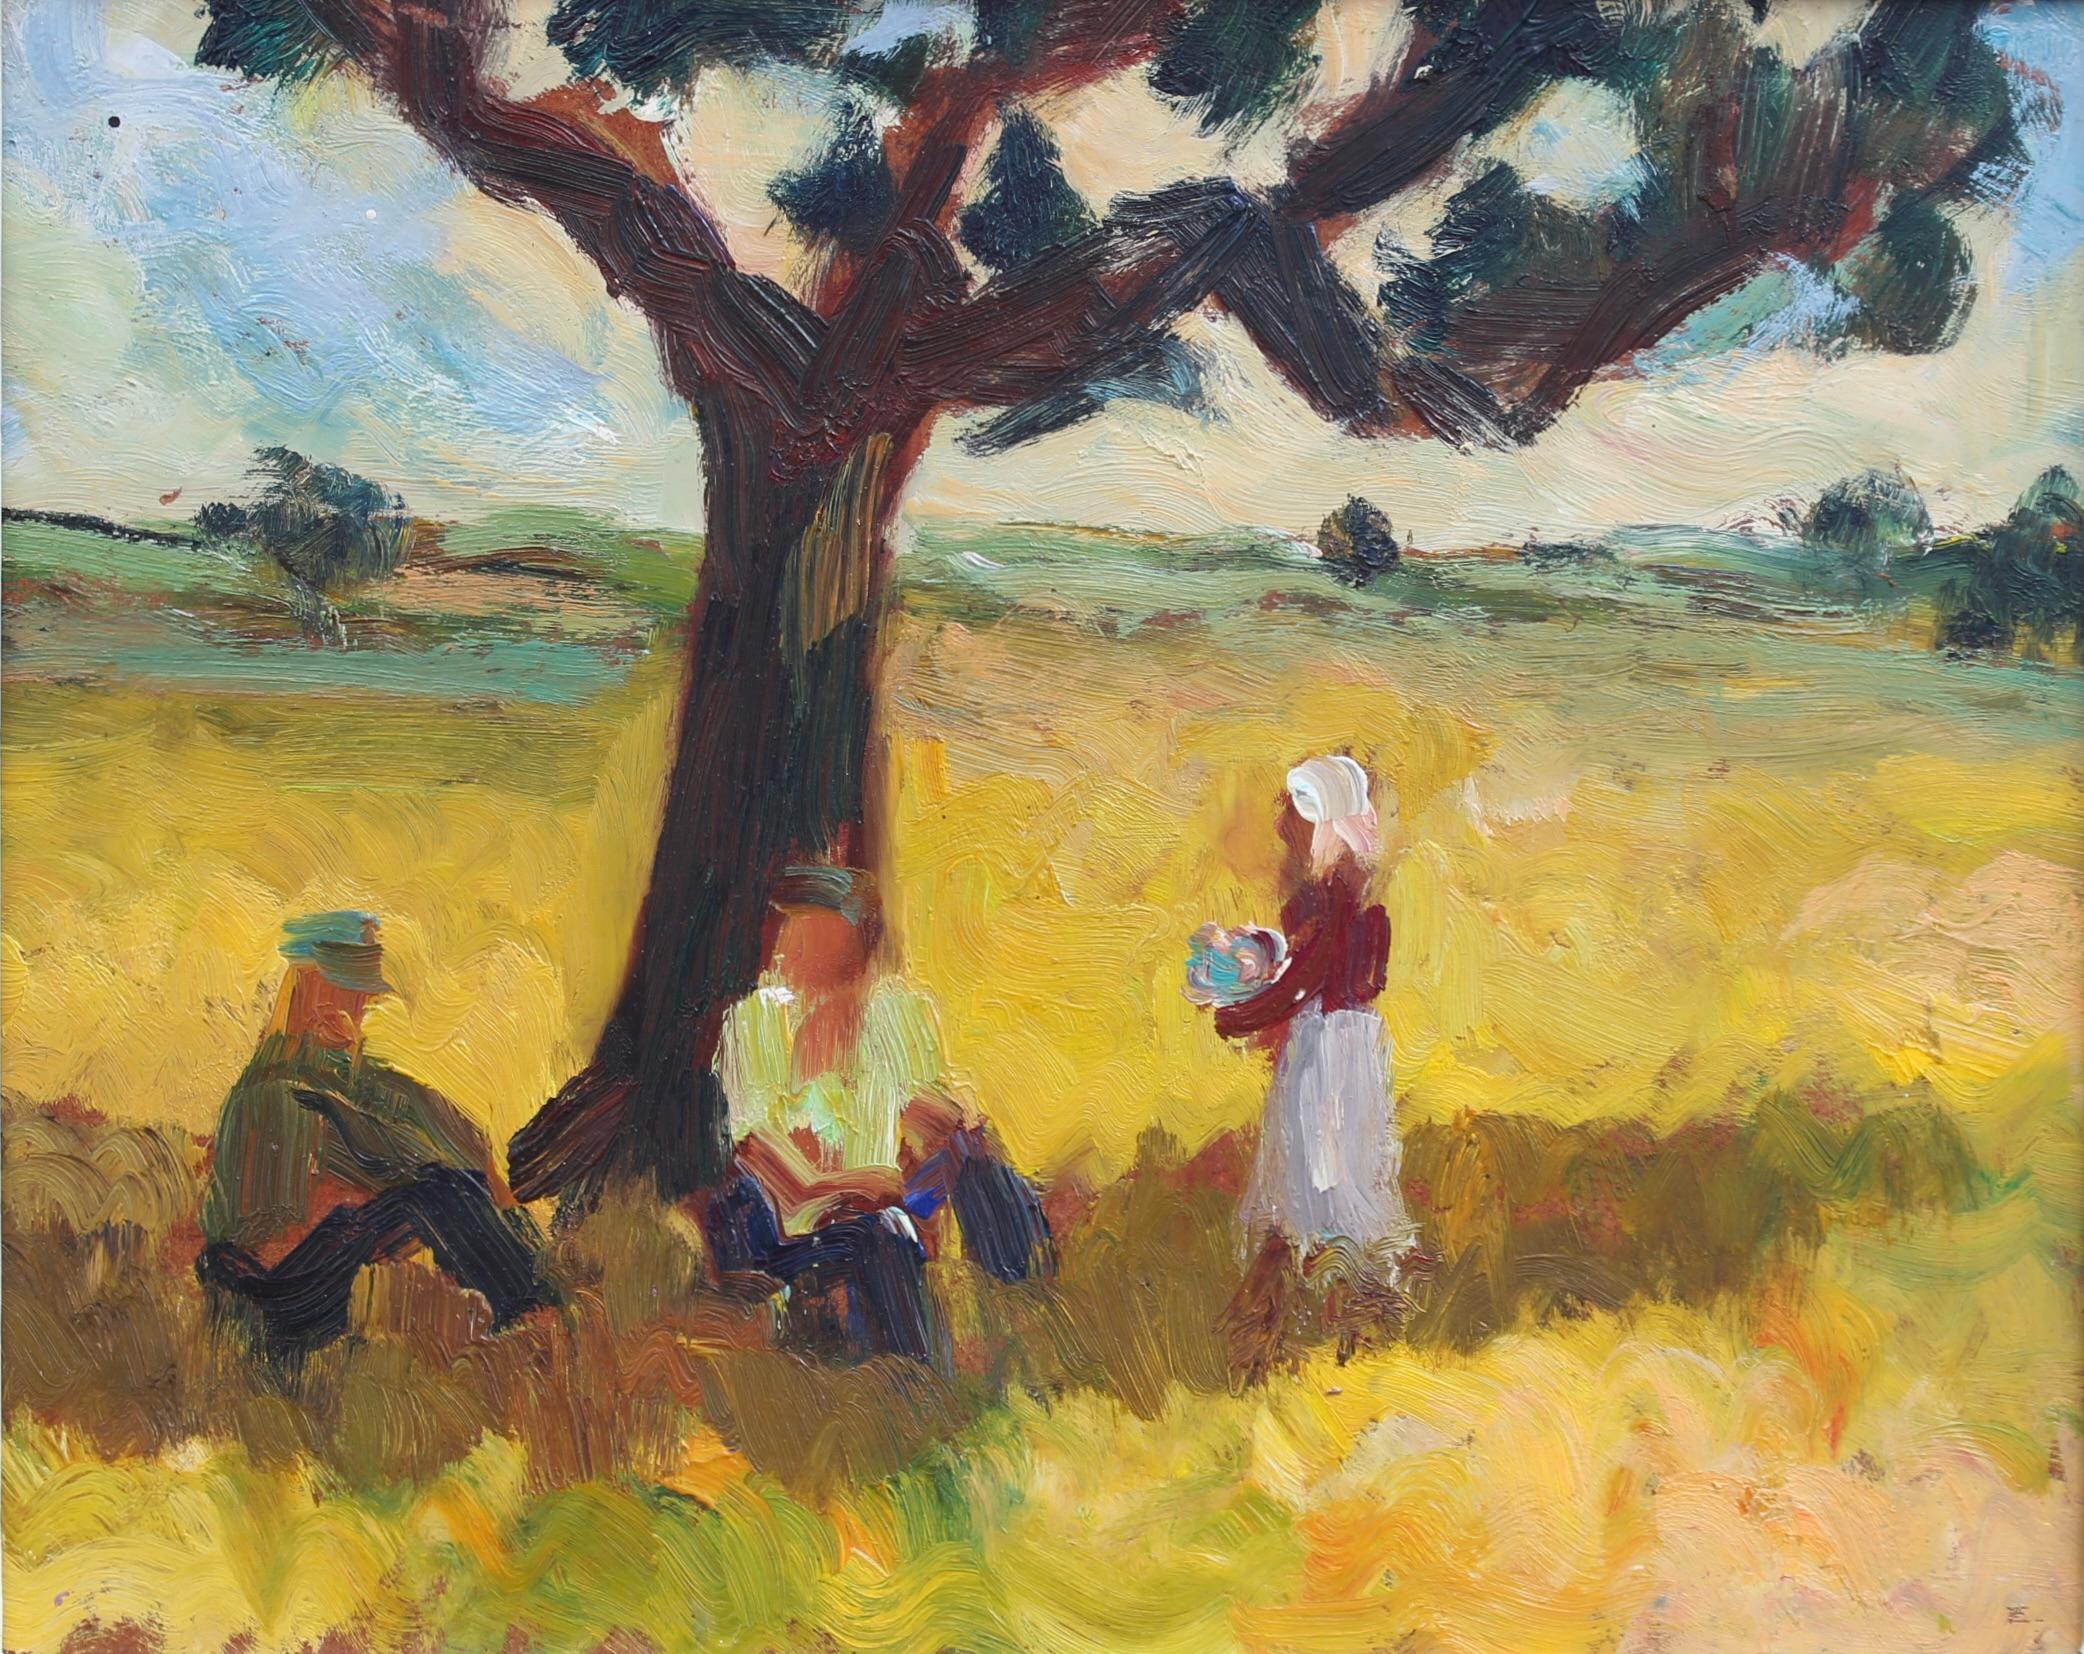 Anna Costa Portrait Painting - Villagers Resting in the Shade